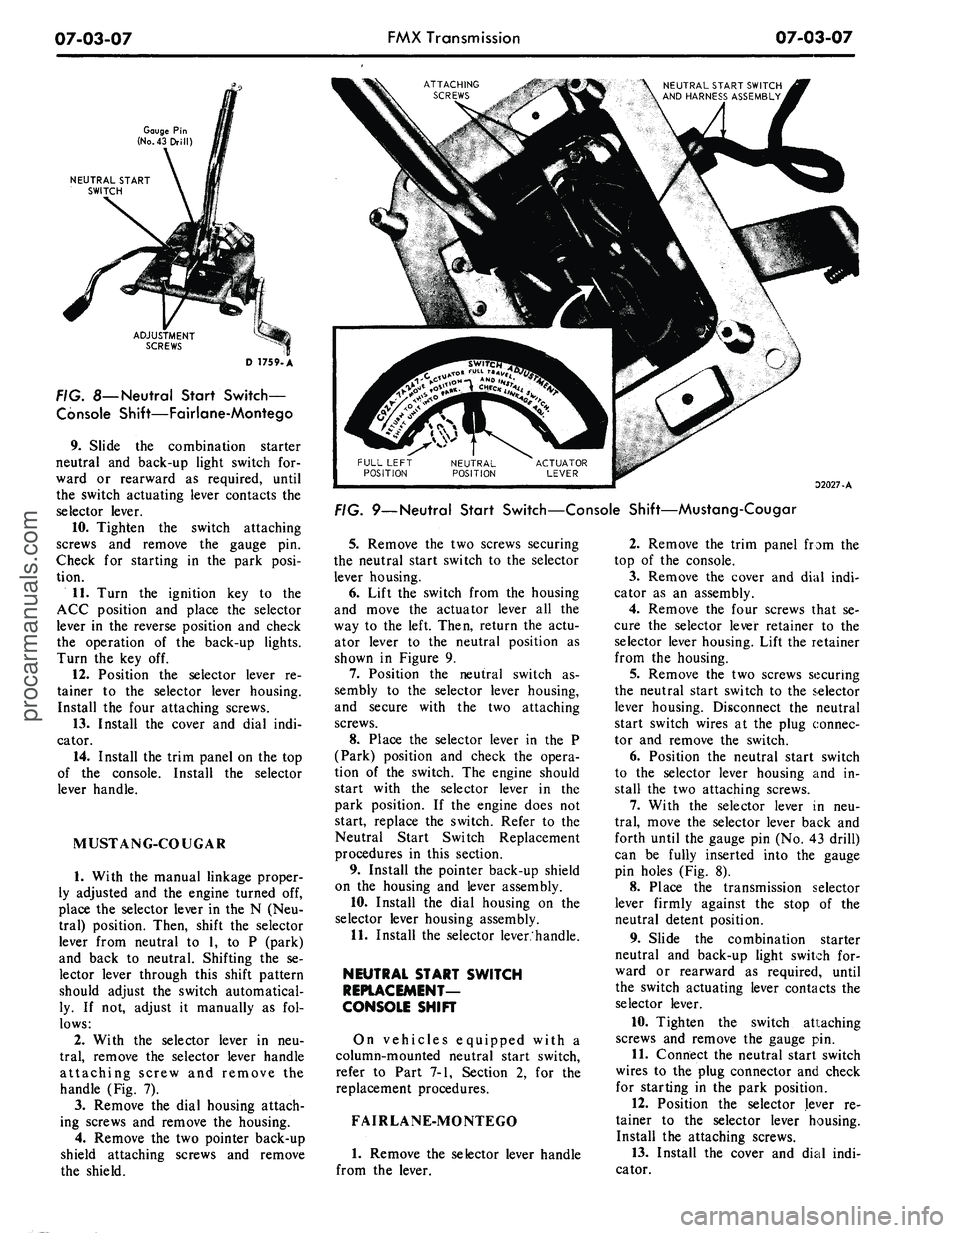 FORD MUSTANG 1969  Volume One Chassis 
07-03-07 
FMX Transmission

07-03-07

Gauge Pin

(No.
 43 Drill)

NEUTRAL START

SWITCH

ADJUSTMENT

SCREWS

D 1759-A

FIG. 8—
 Neutral
 Start Switch-

Console Shift—Fairlane-Montego

9. Slide th